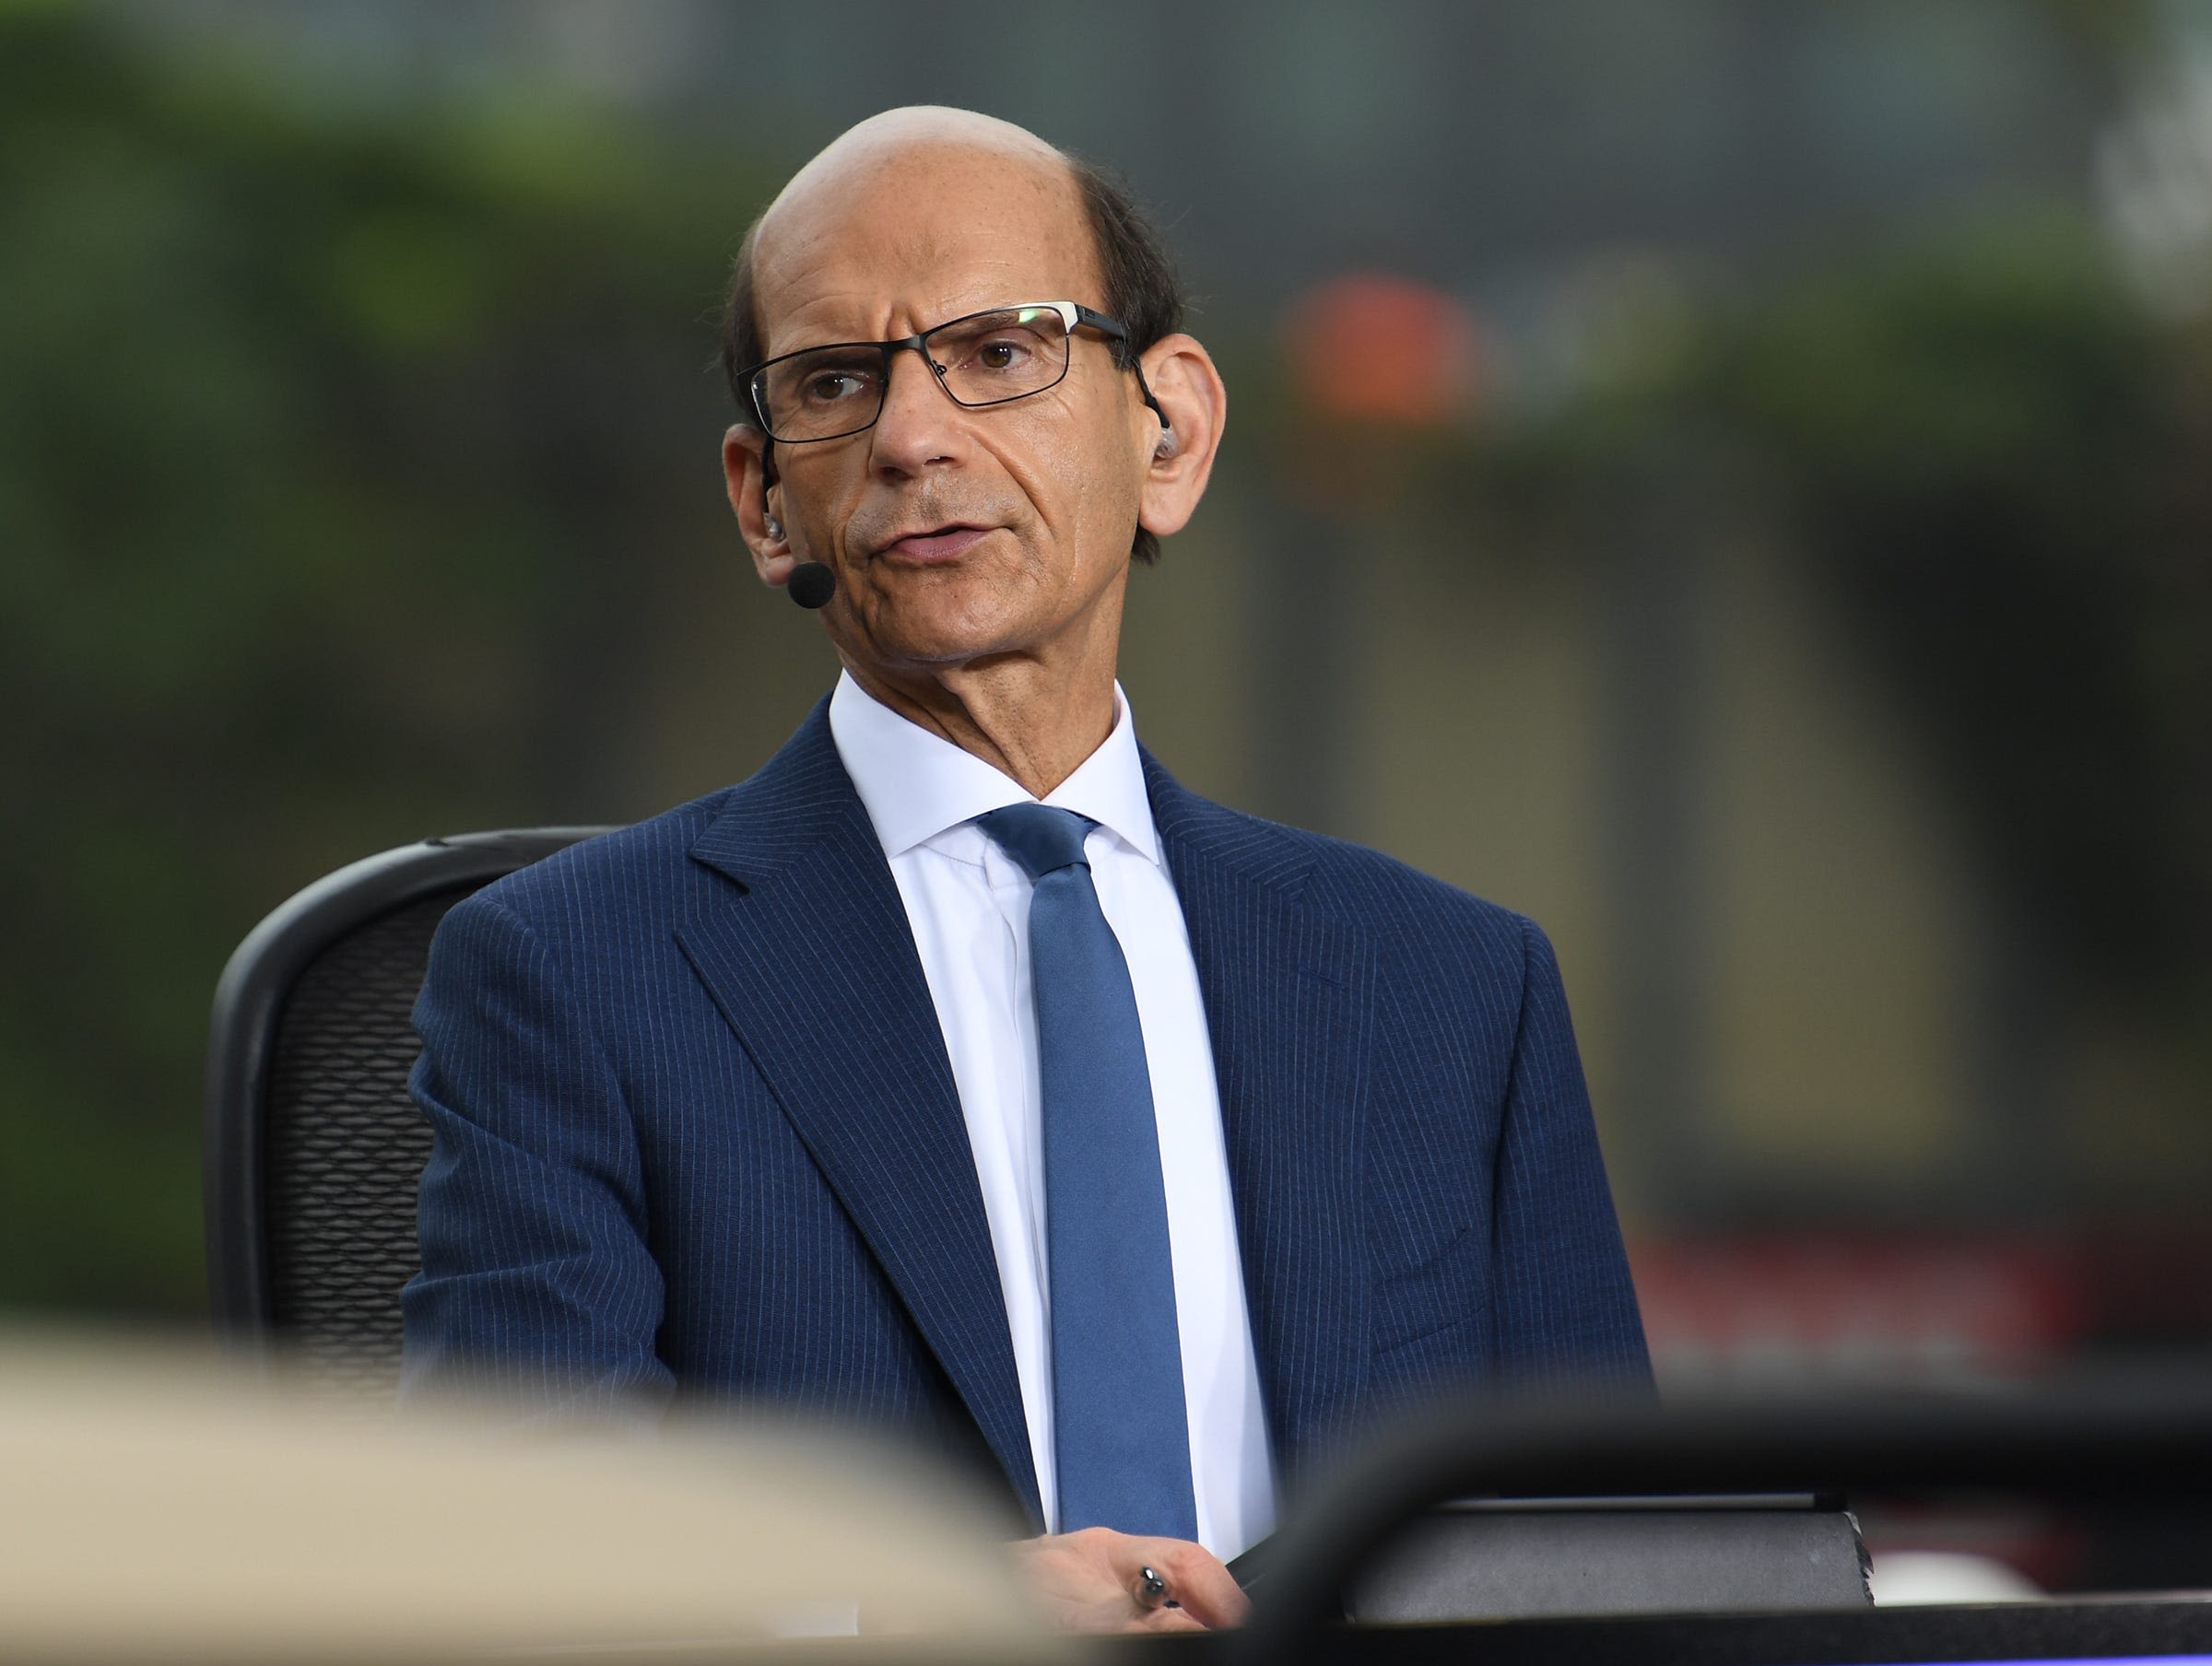 Paul Finebaum says Florida State has ‘pulled away’ from Clemson